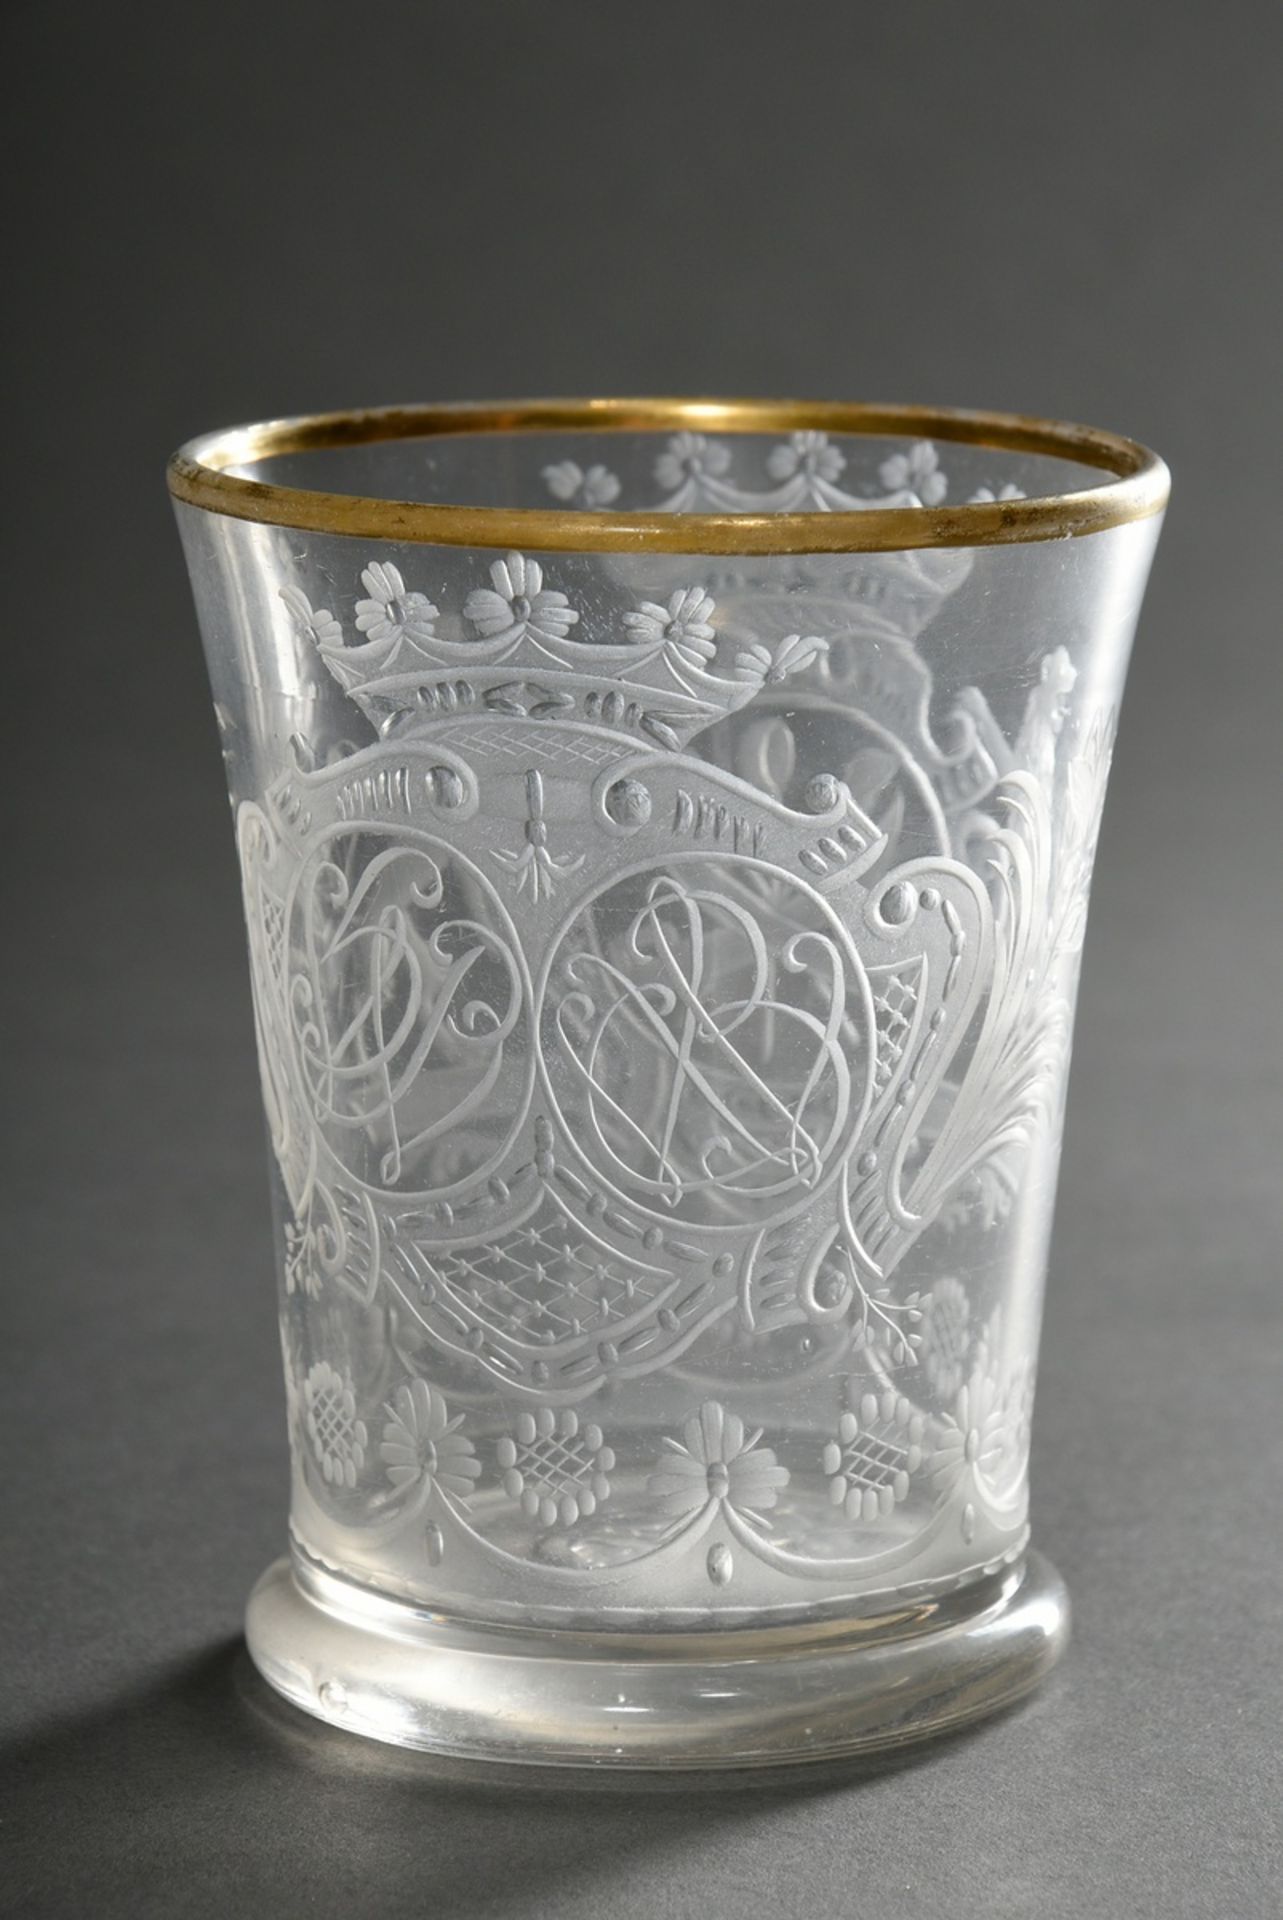 Beaker in baroque style with ligatured double monogram "HPW" and "CBW" in crowned cartouche as well - Image 2 of 4